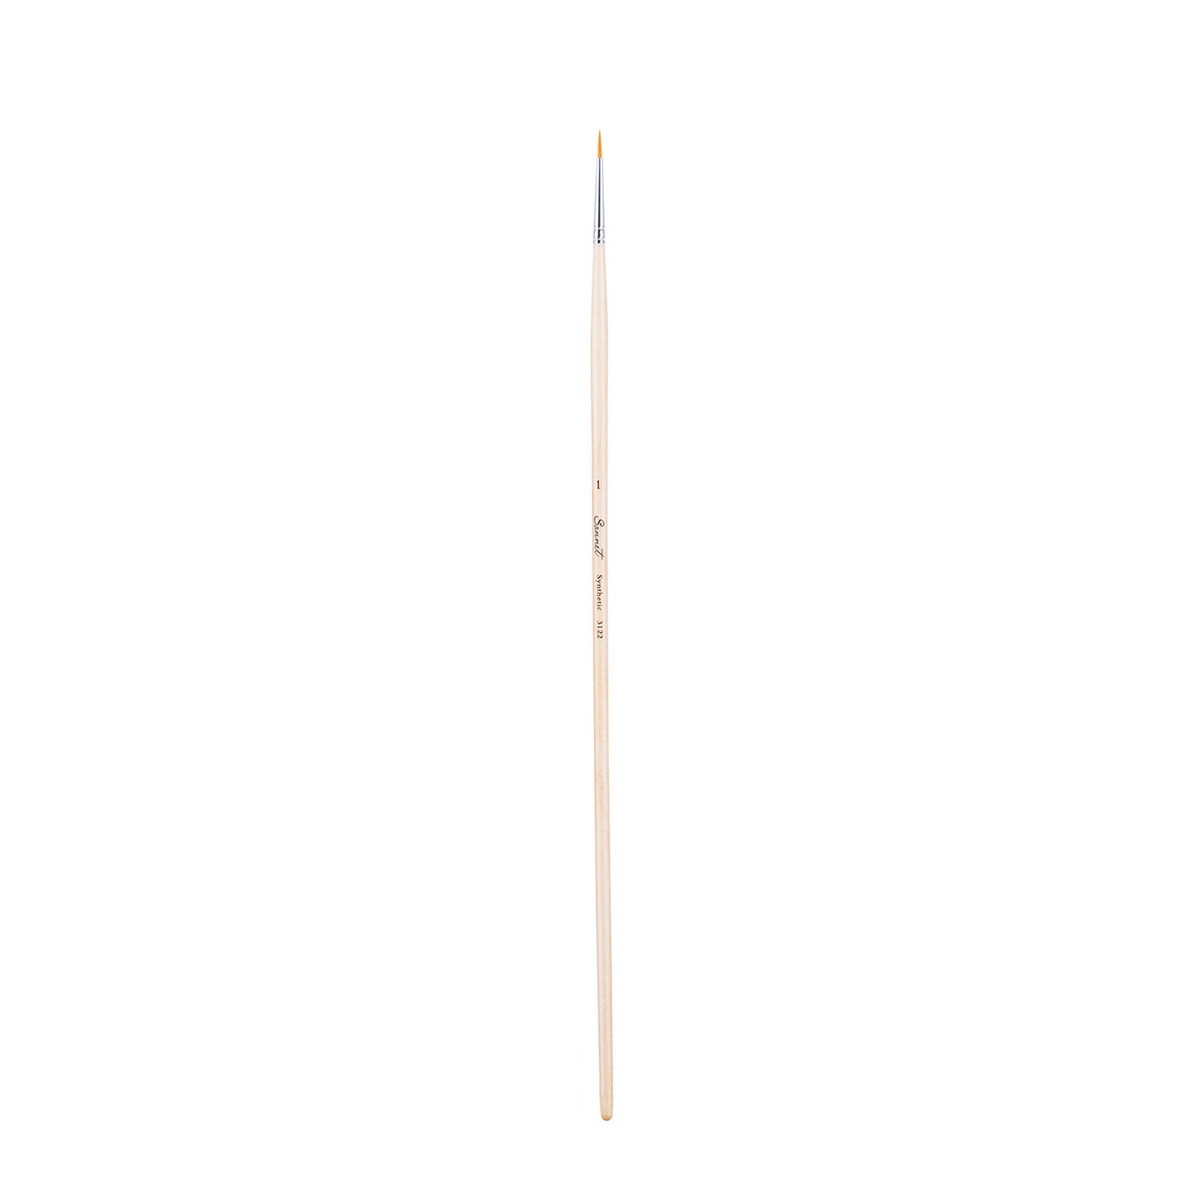 Synthetic brushes "Sonnet", round, long handle